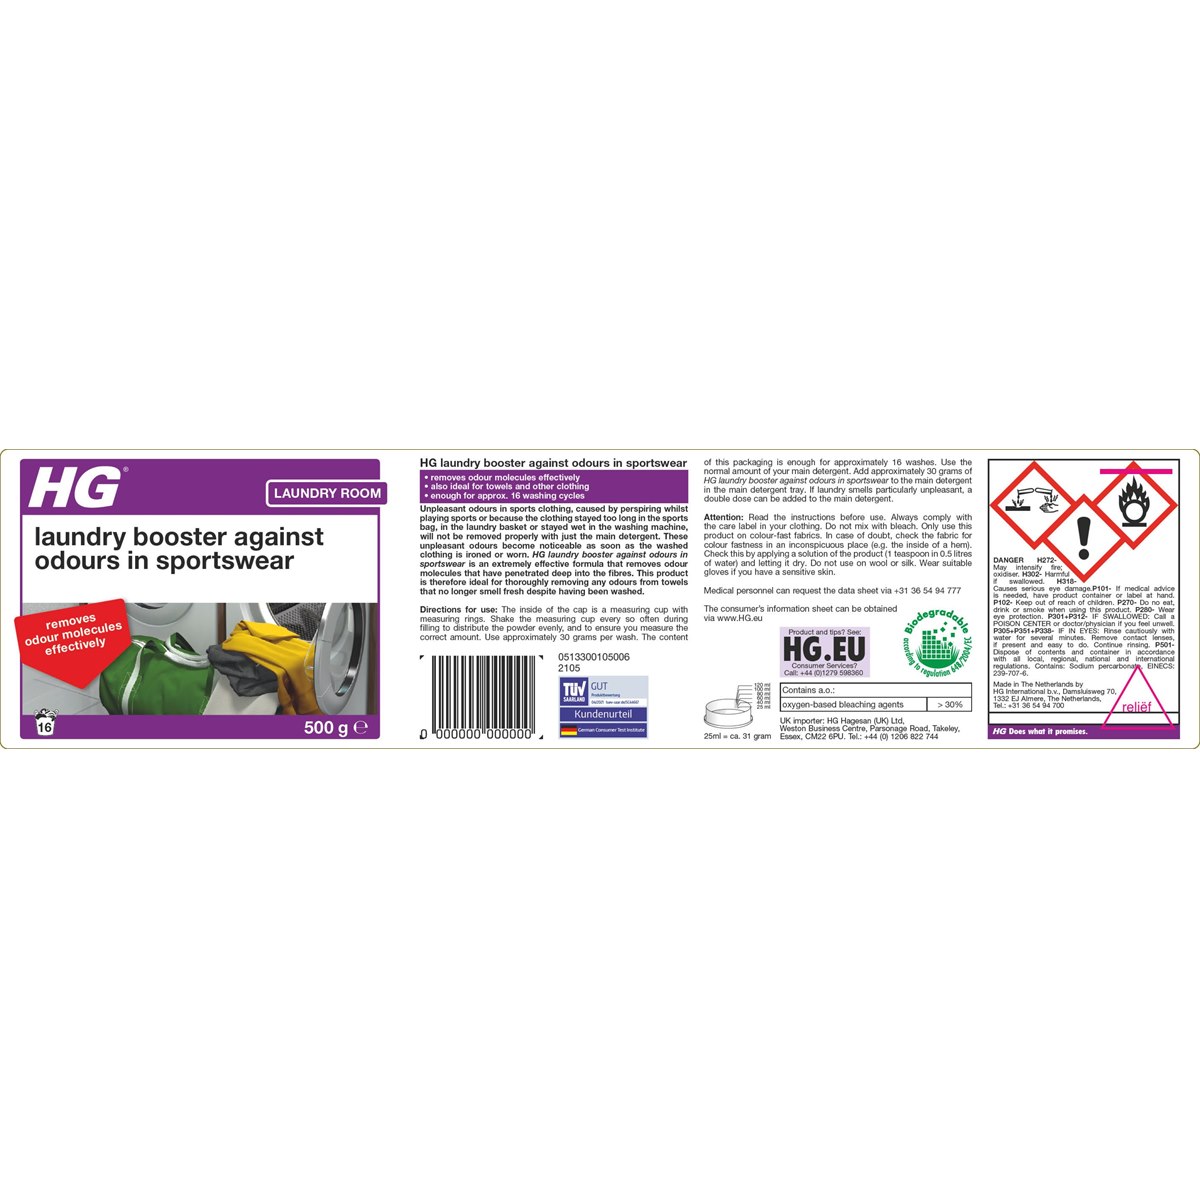 HG Laundry Booster Against Odours in Sportswear Instructions